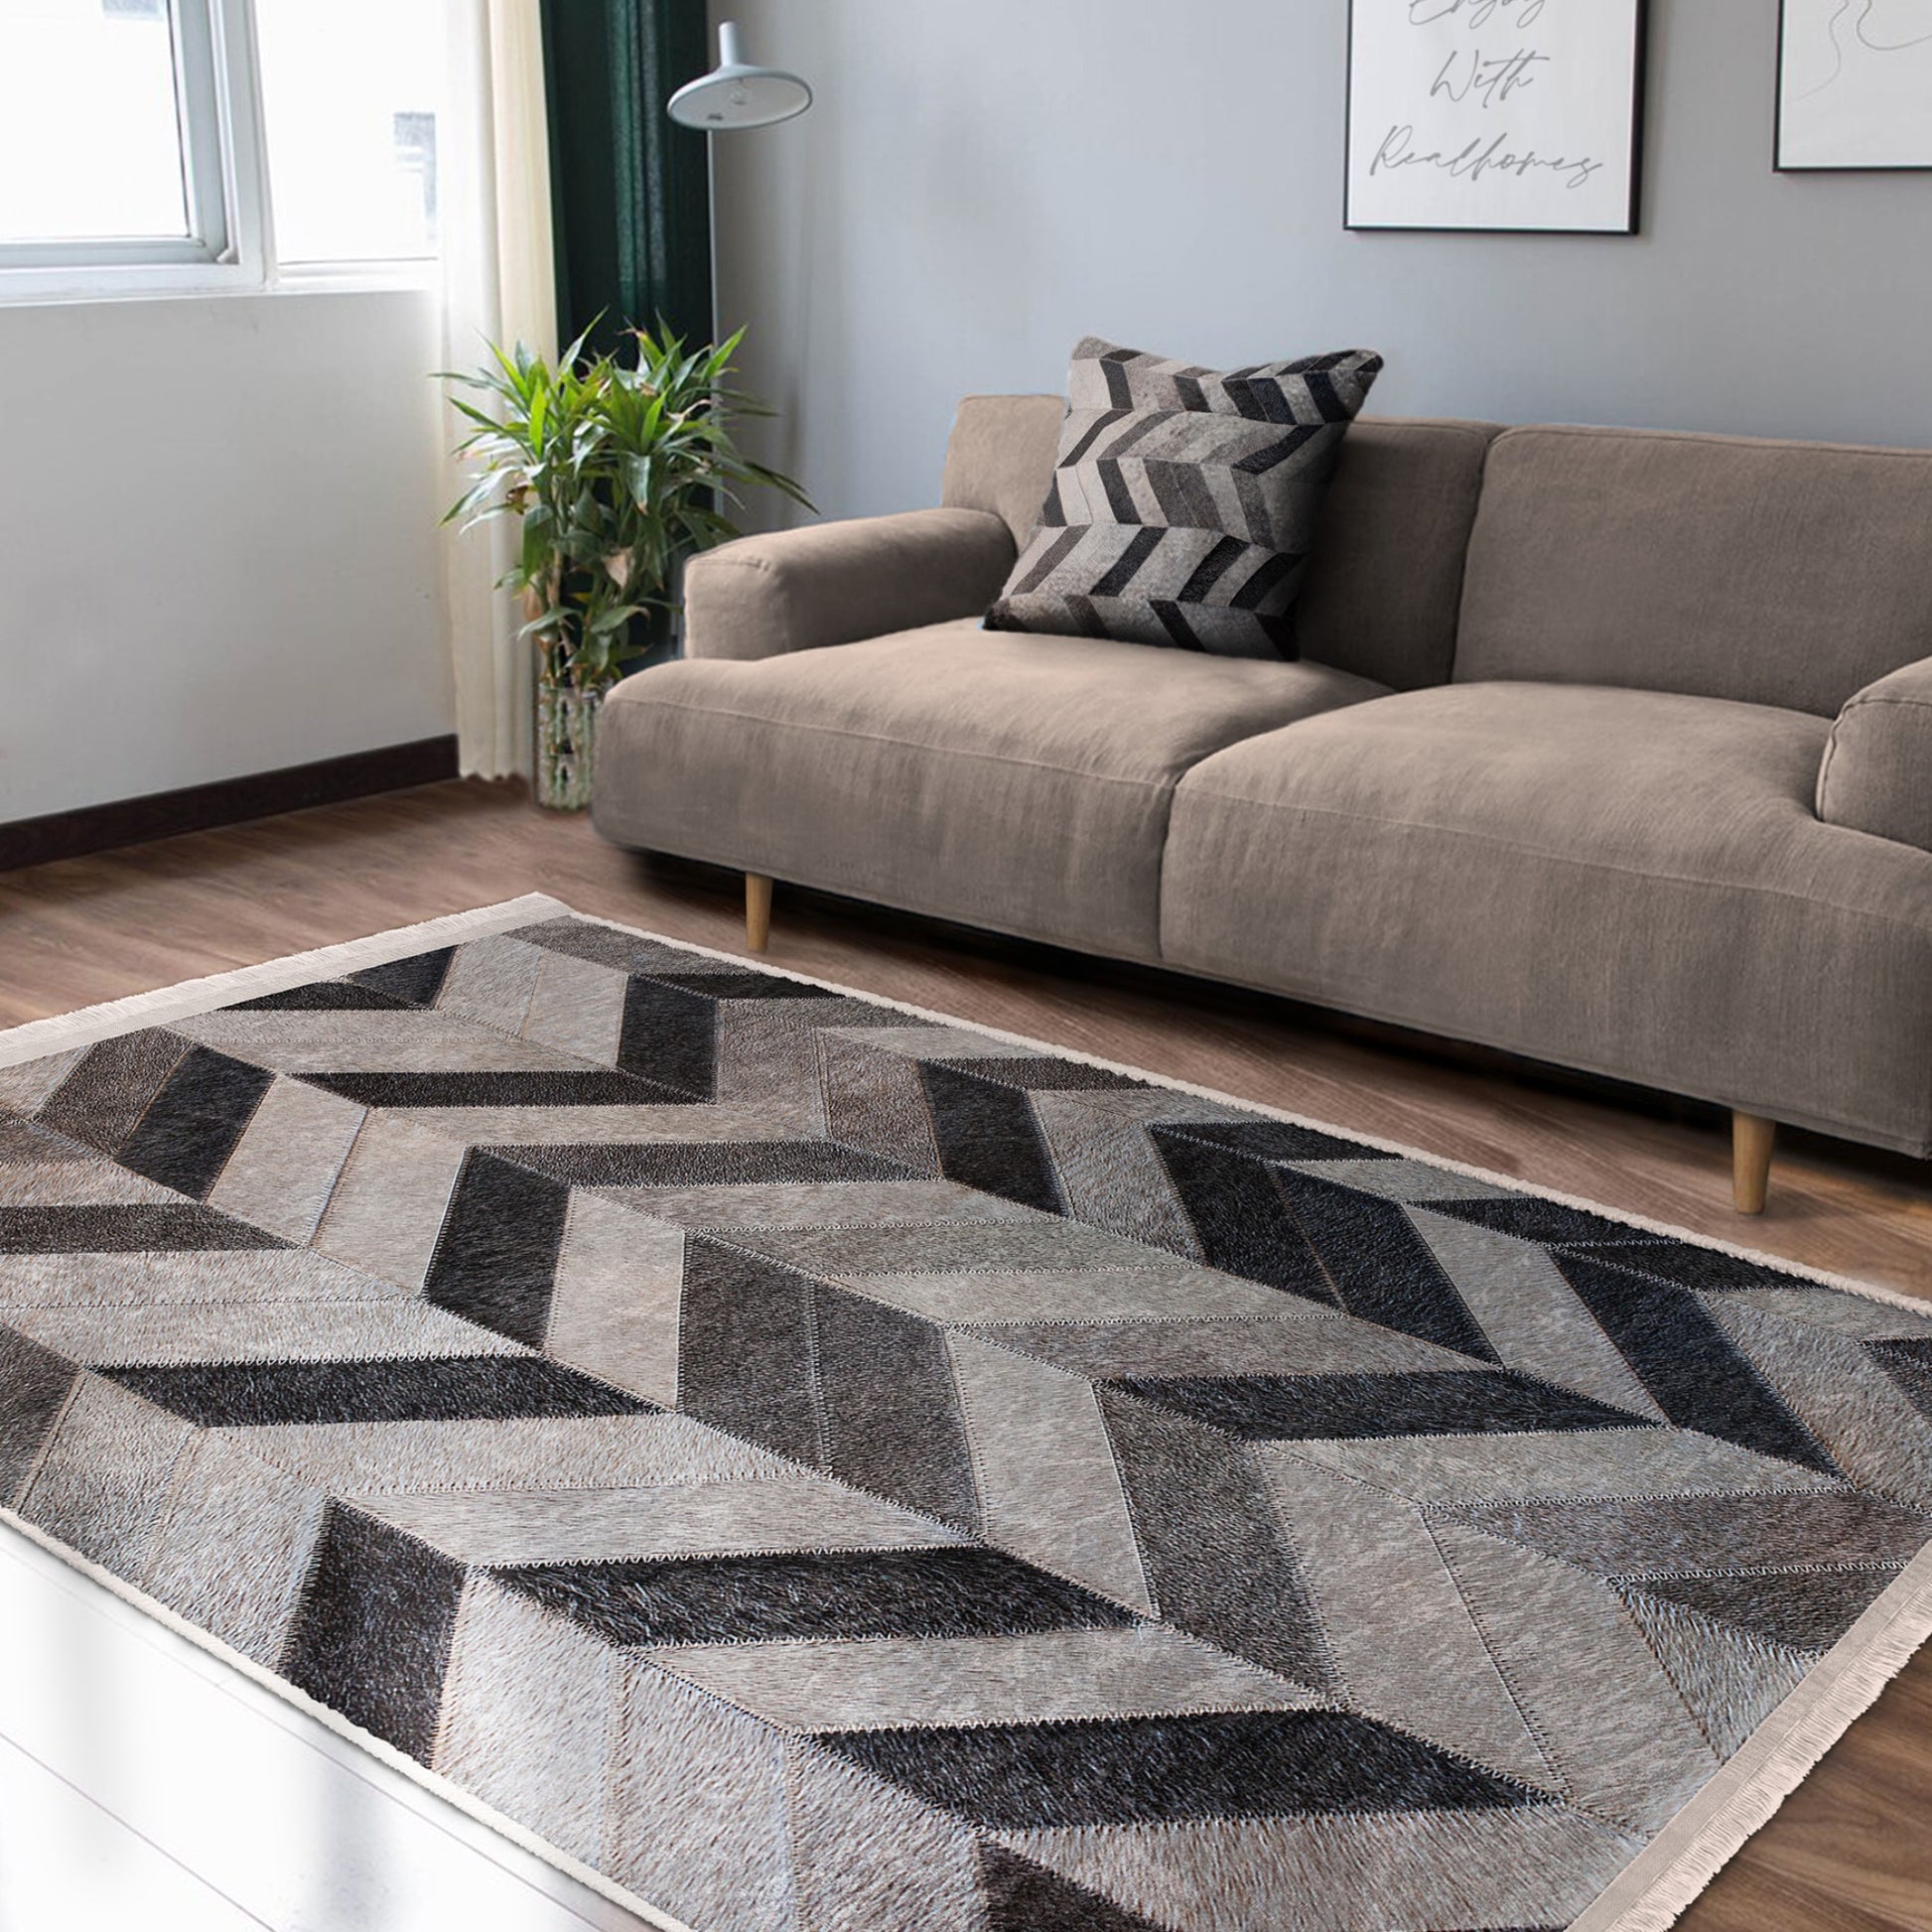 Stylish and Contemporary Rug for a Modern Living Space